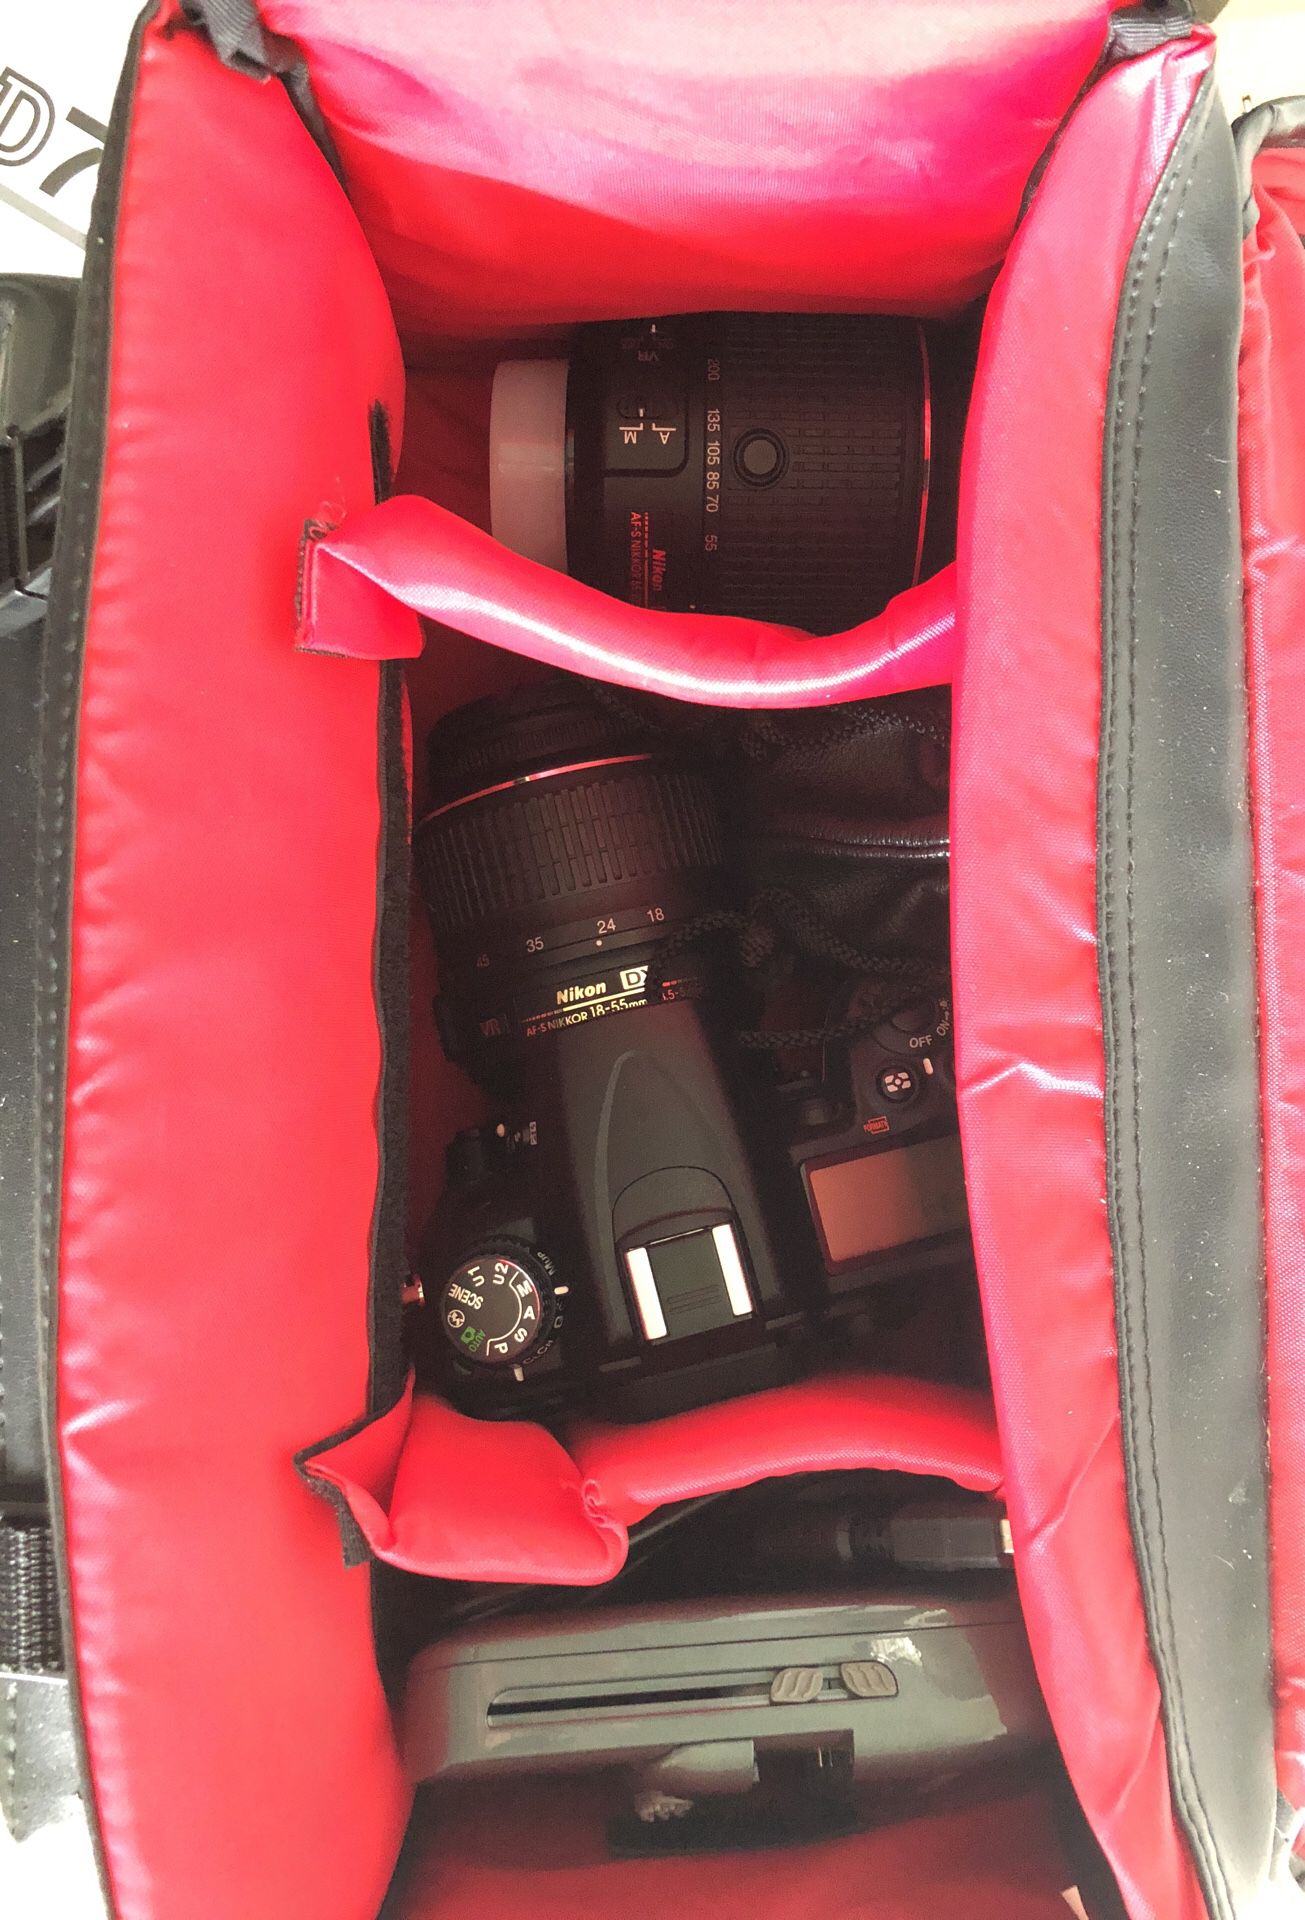 Nikon D7000 camera with 3 lenses, charger, and extra battery set